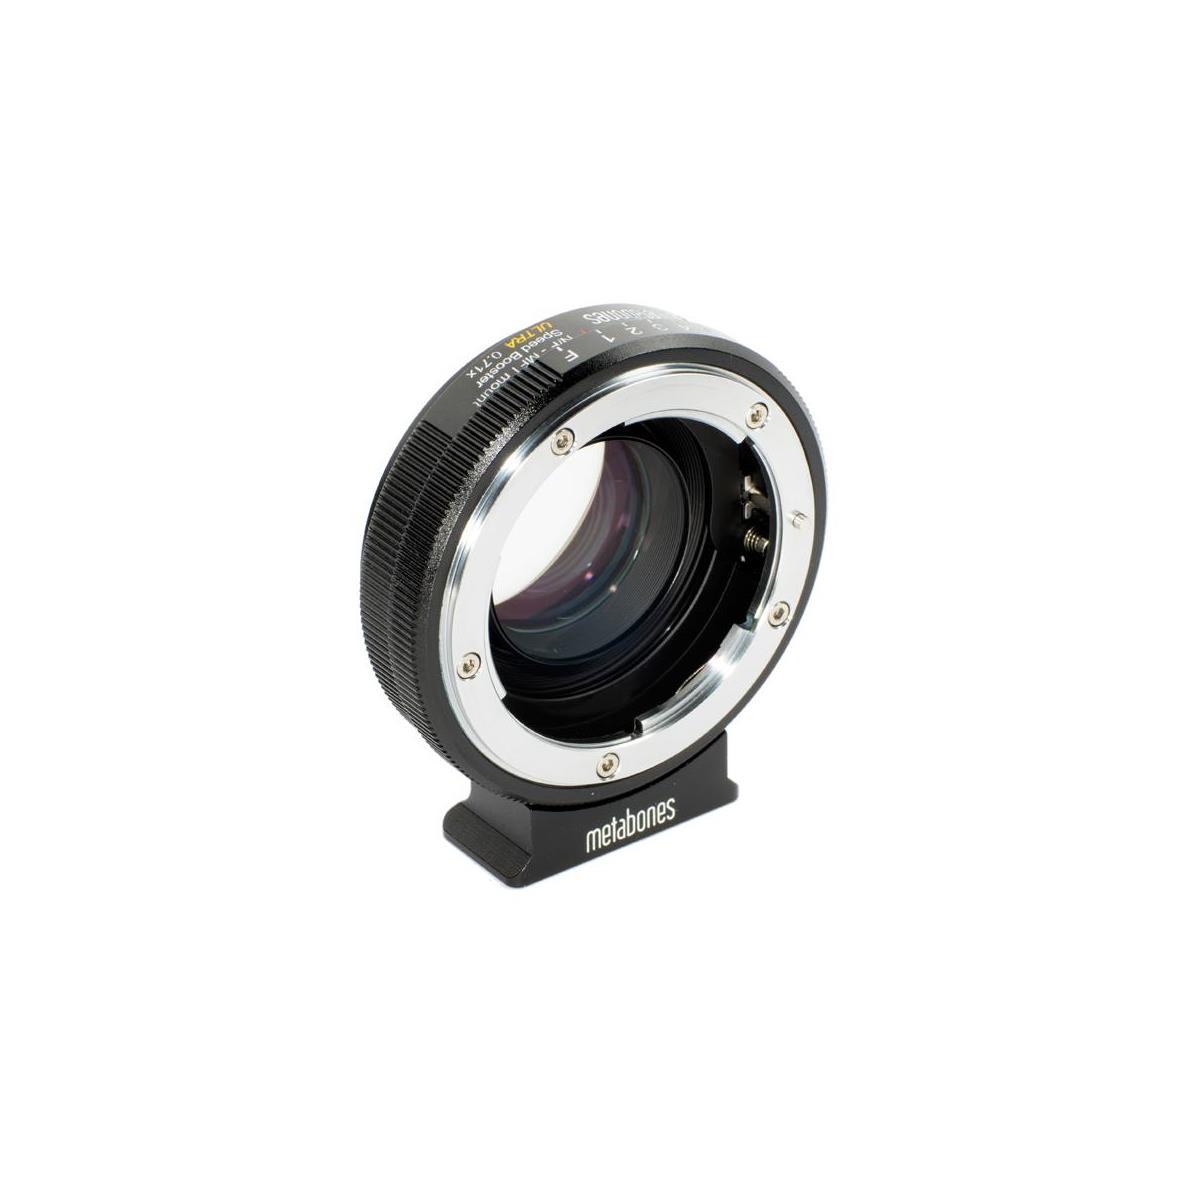 Metabones Speed Booster Ultra 0.71x  Adapter for Nikon G Lens to Micro Four Thirds-Mount Camera